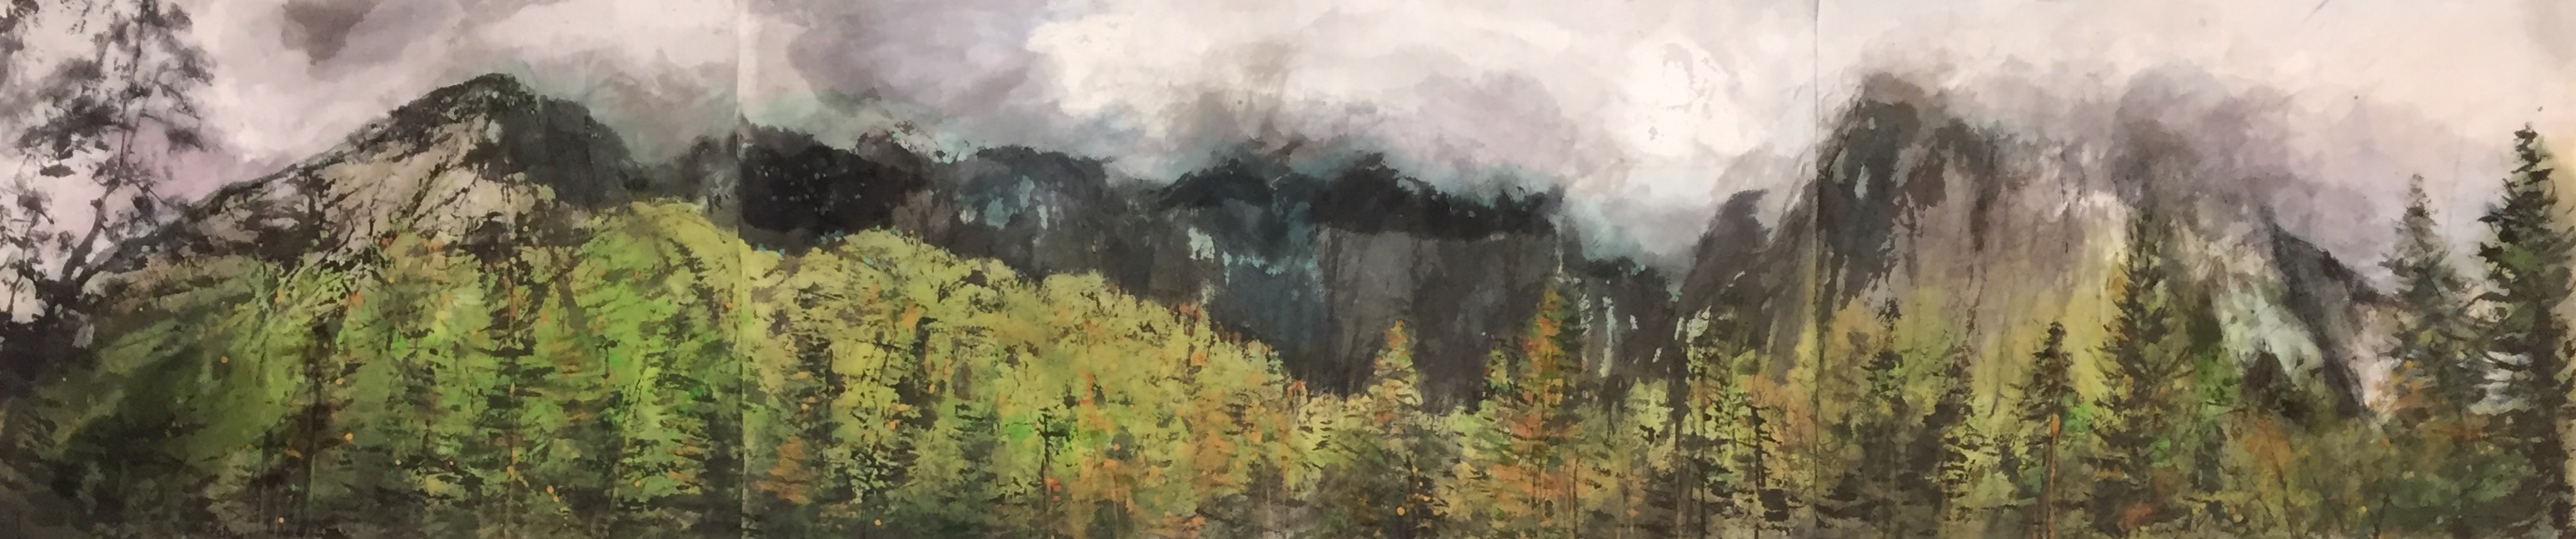 Contemporary Chinese Brush Painting of Yosemite National Park with storm clouds.